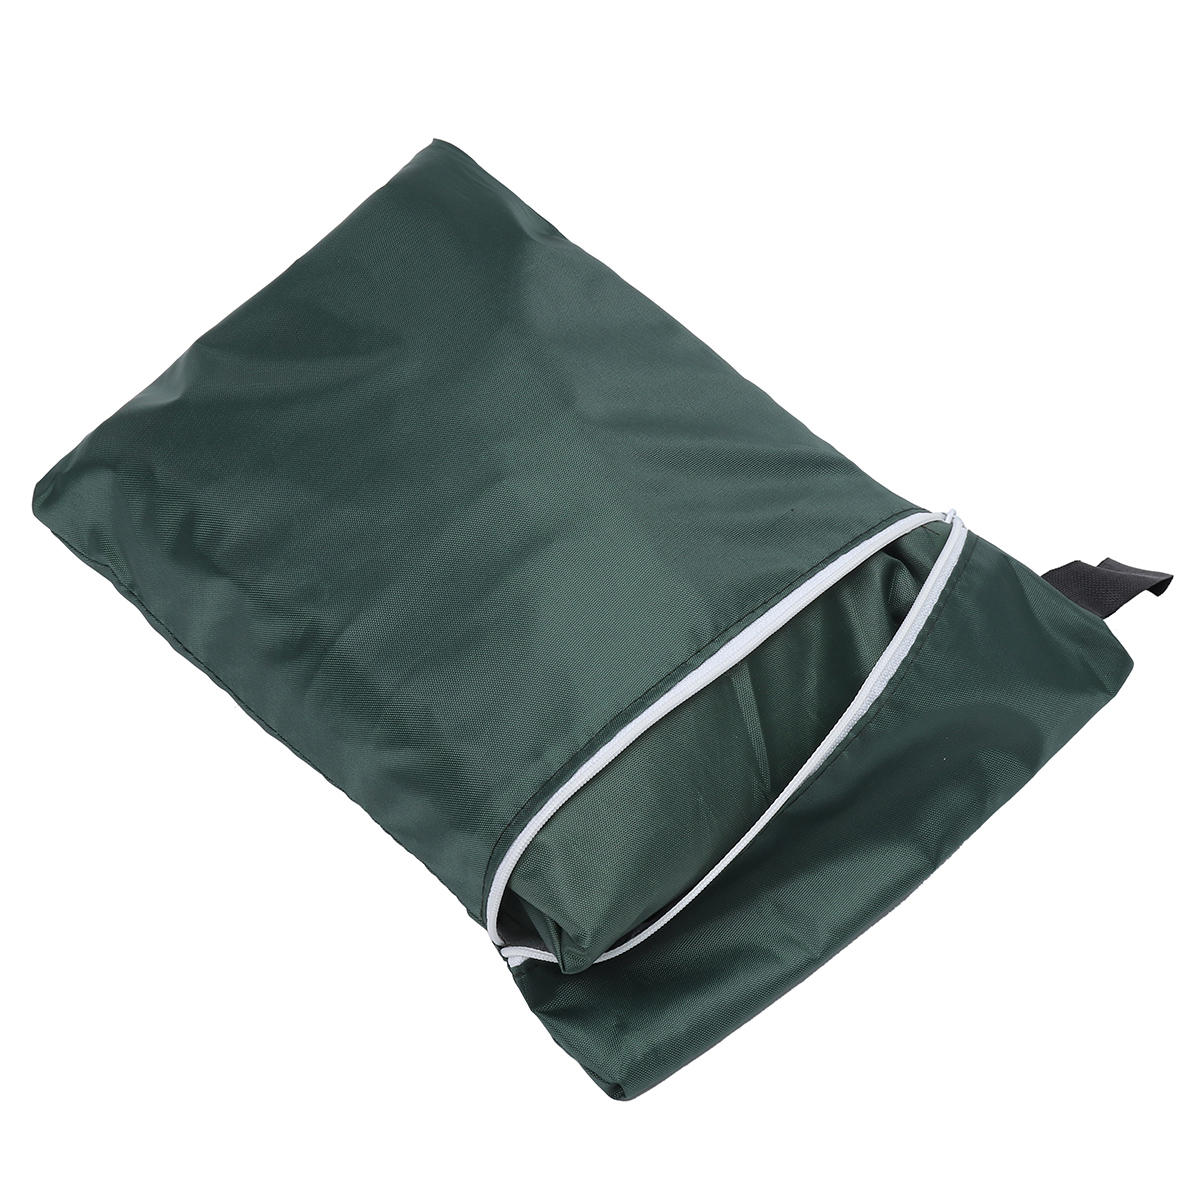 Outdoor Heavy Duty Garden Furniture Waterproof Cover Cushion Storage Bag Carry Pouch